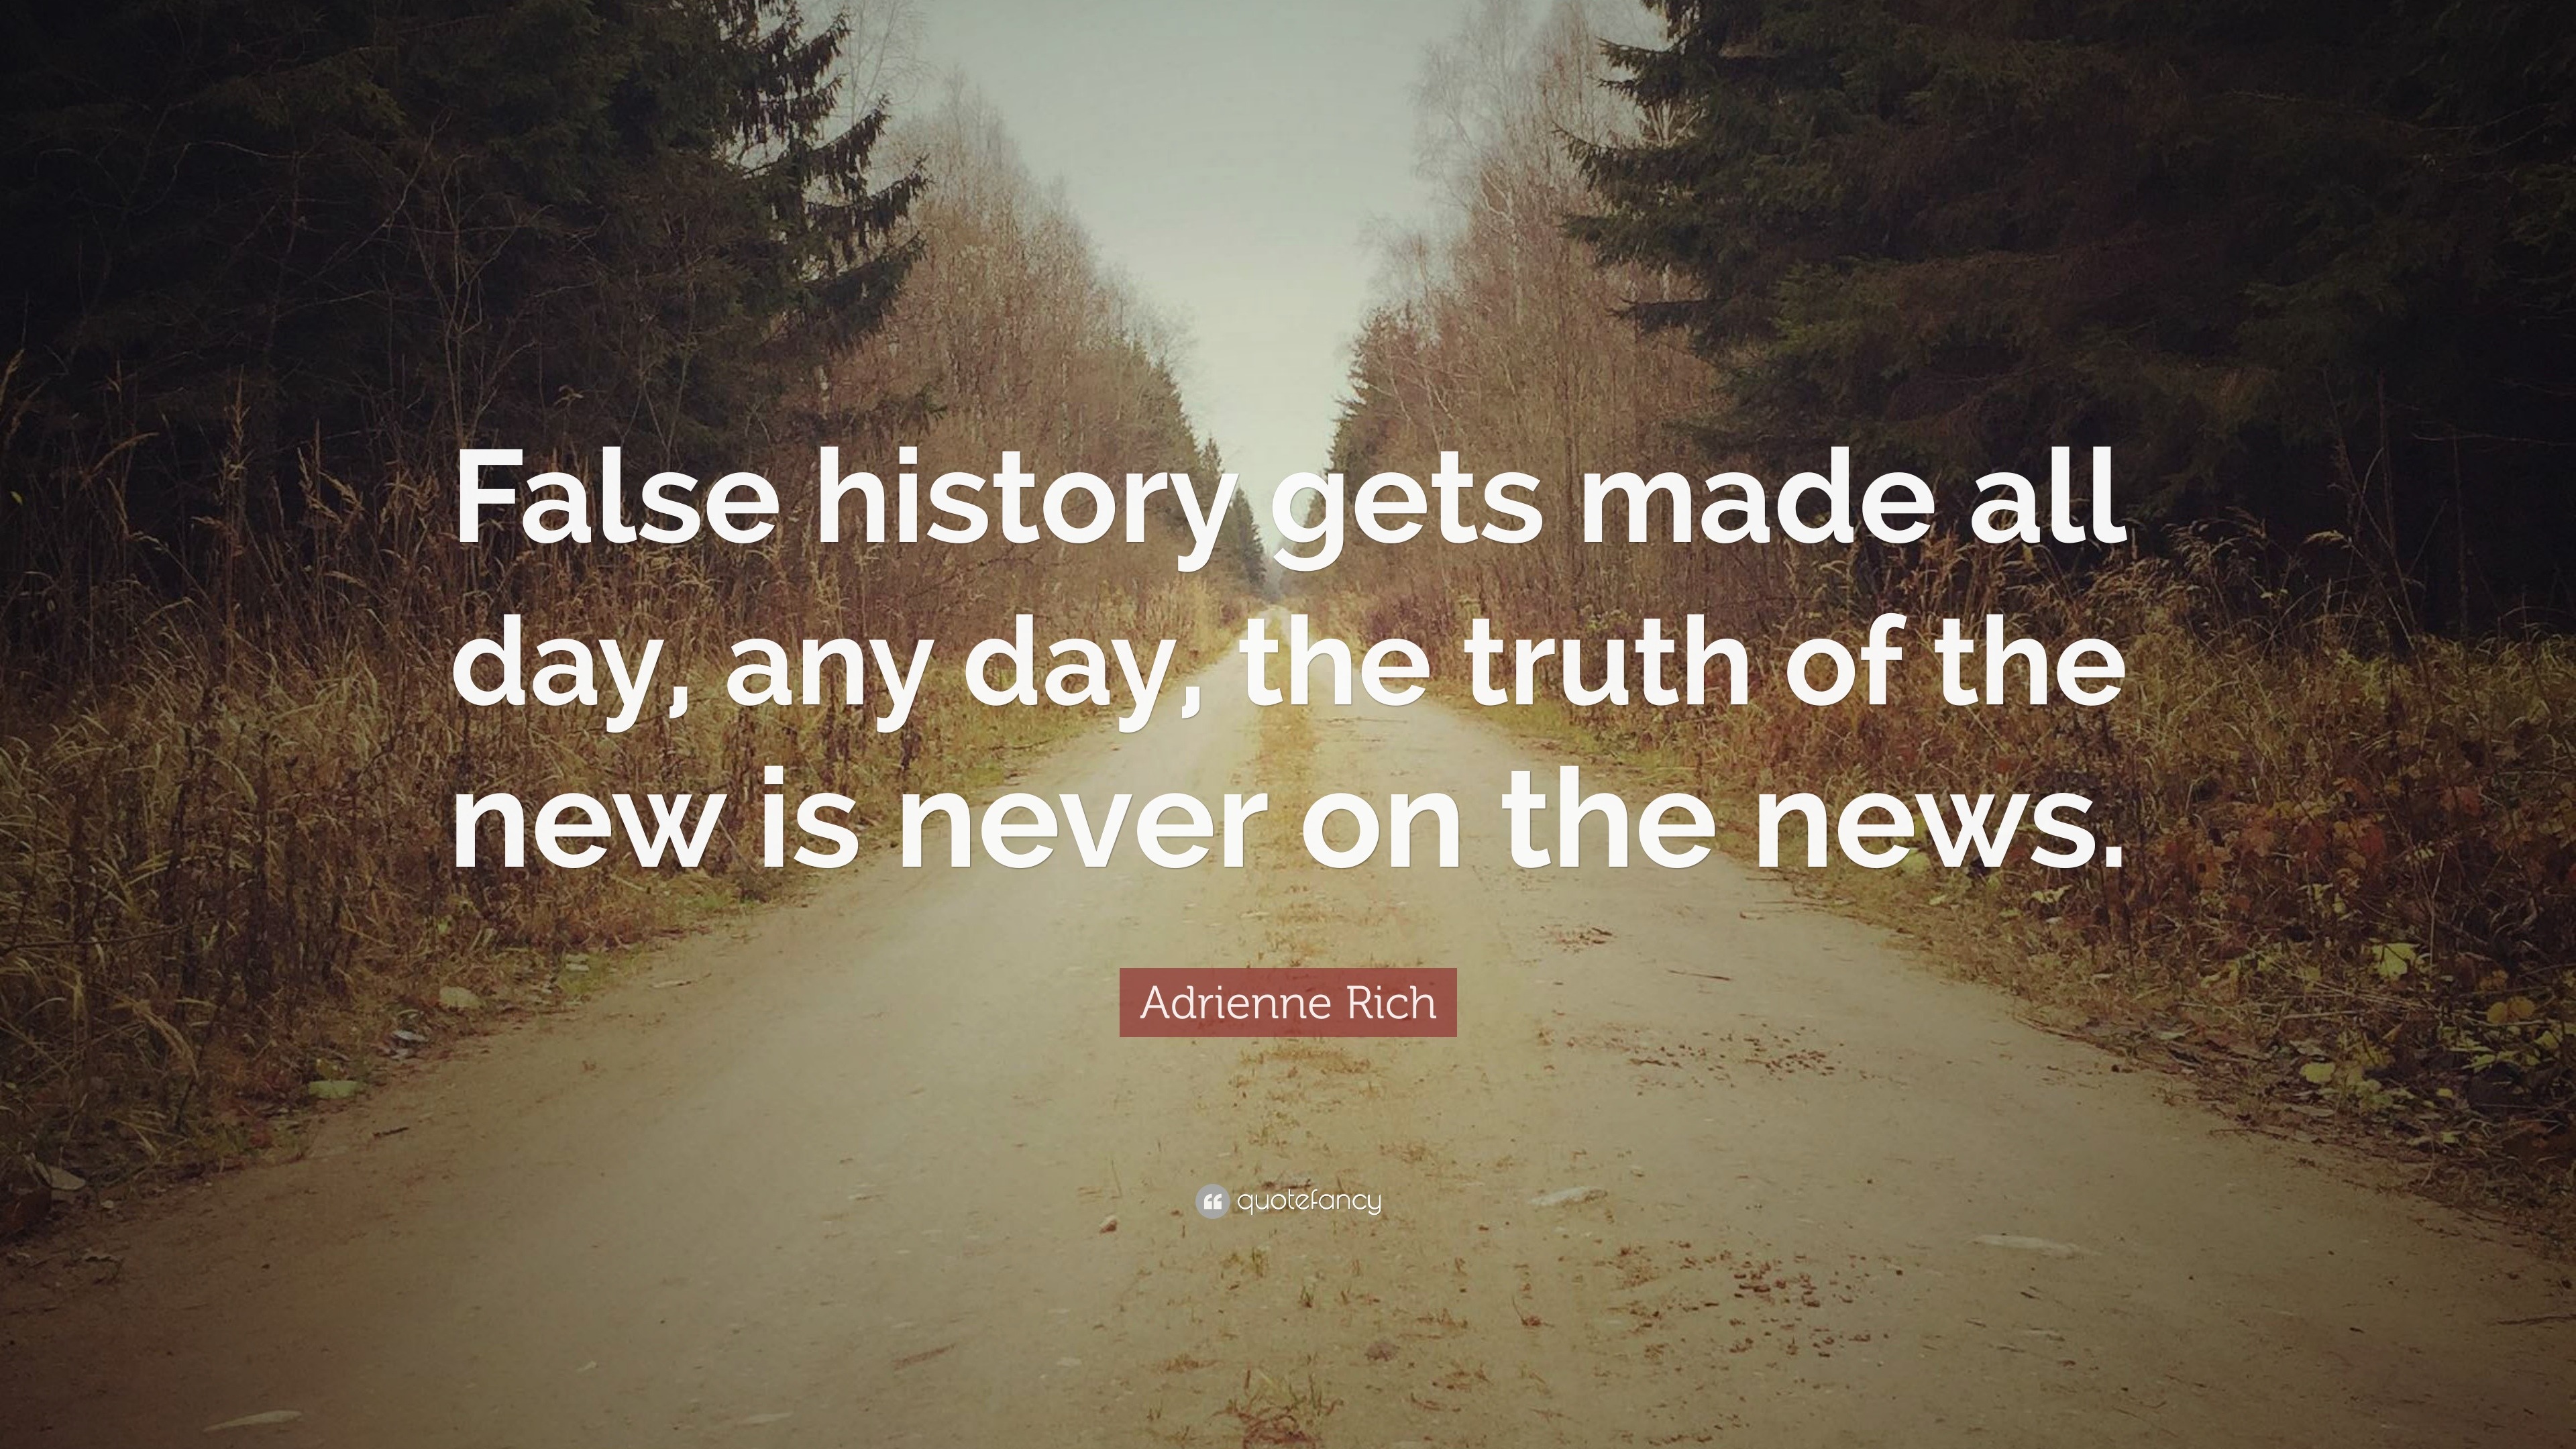 Adrienne Rich Quote: "False history gets made all day, any ...